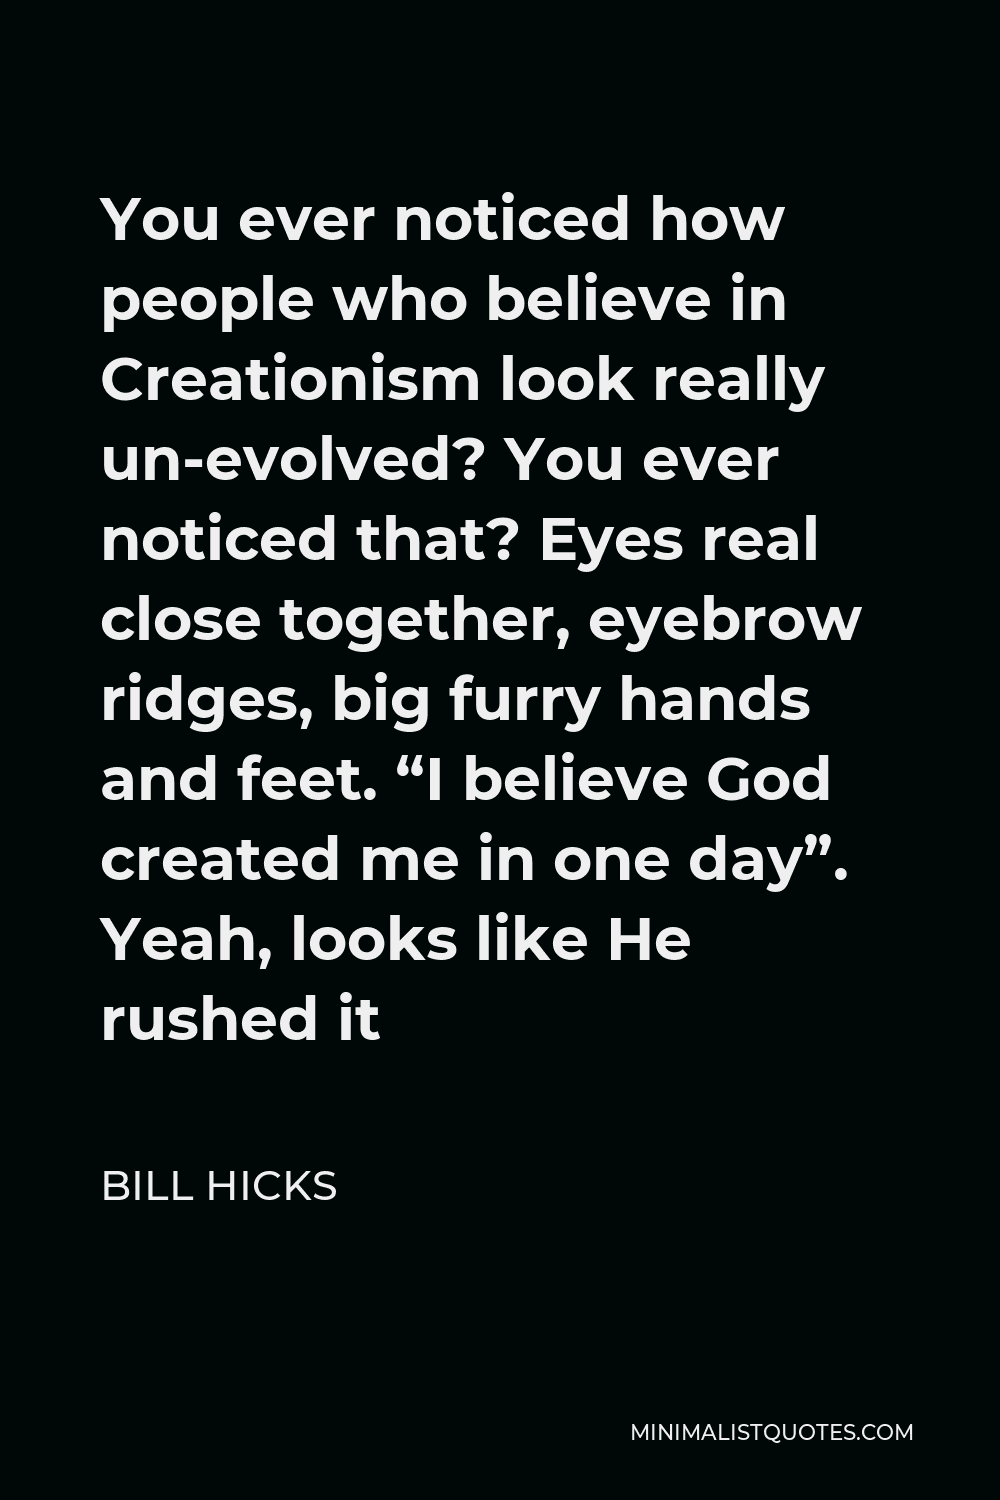 Bill Hicks Quote - You ever noticed how people who believe in Creationism look really un-evolved? You ever noticed that? Eyes real close together, eyebrow ridges, big furry hands and feet. “I believe God created me in one day”. Yeah, looks like He rushed it